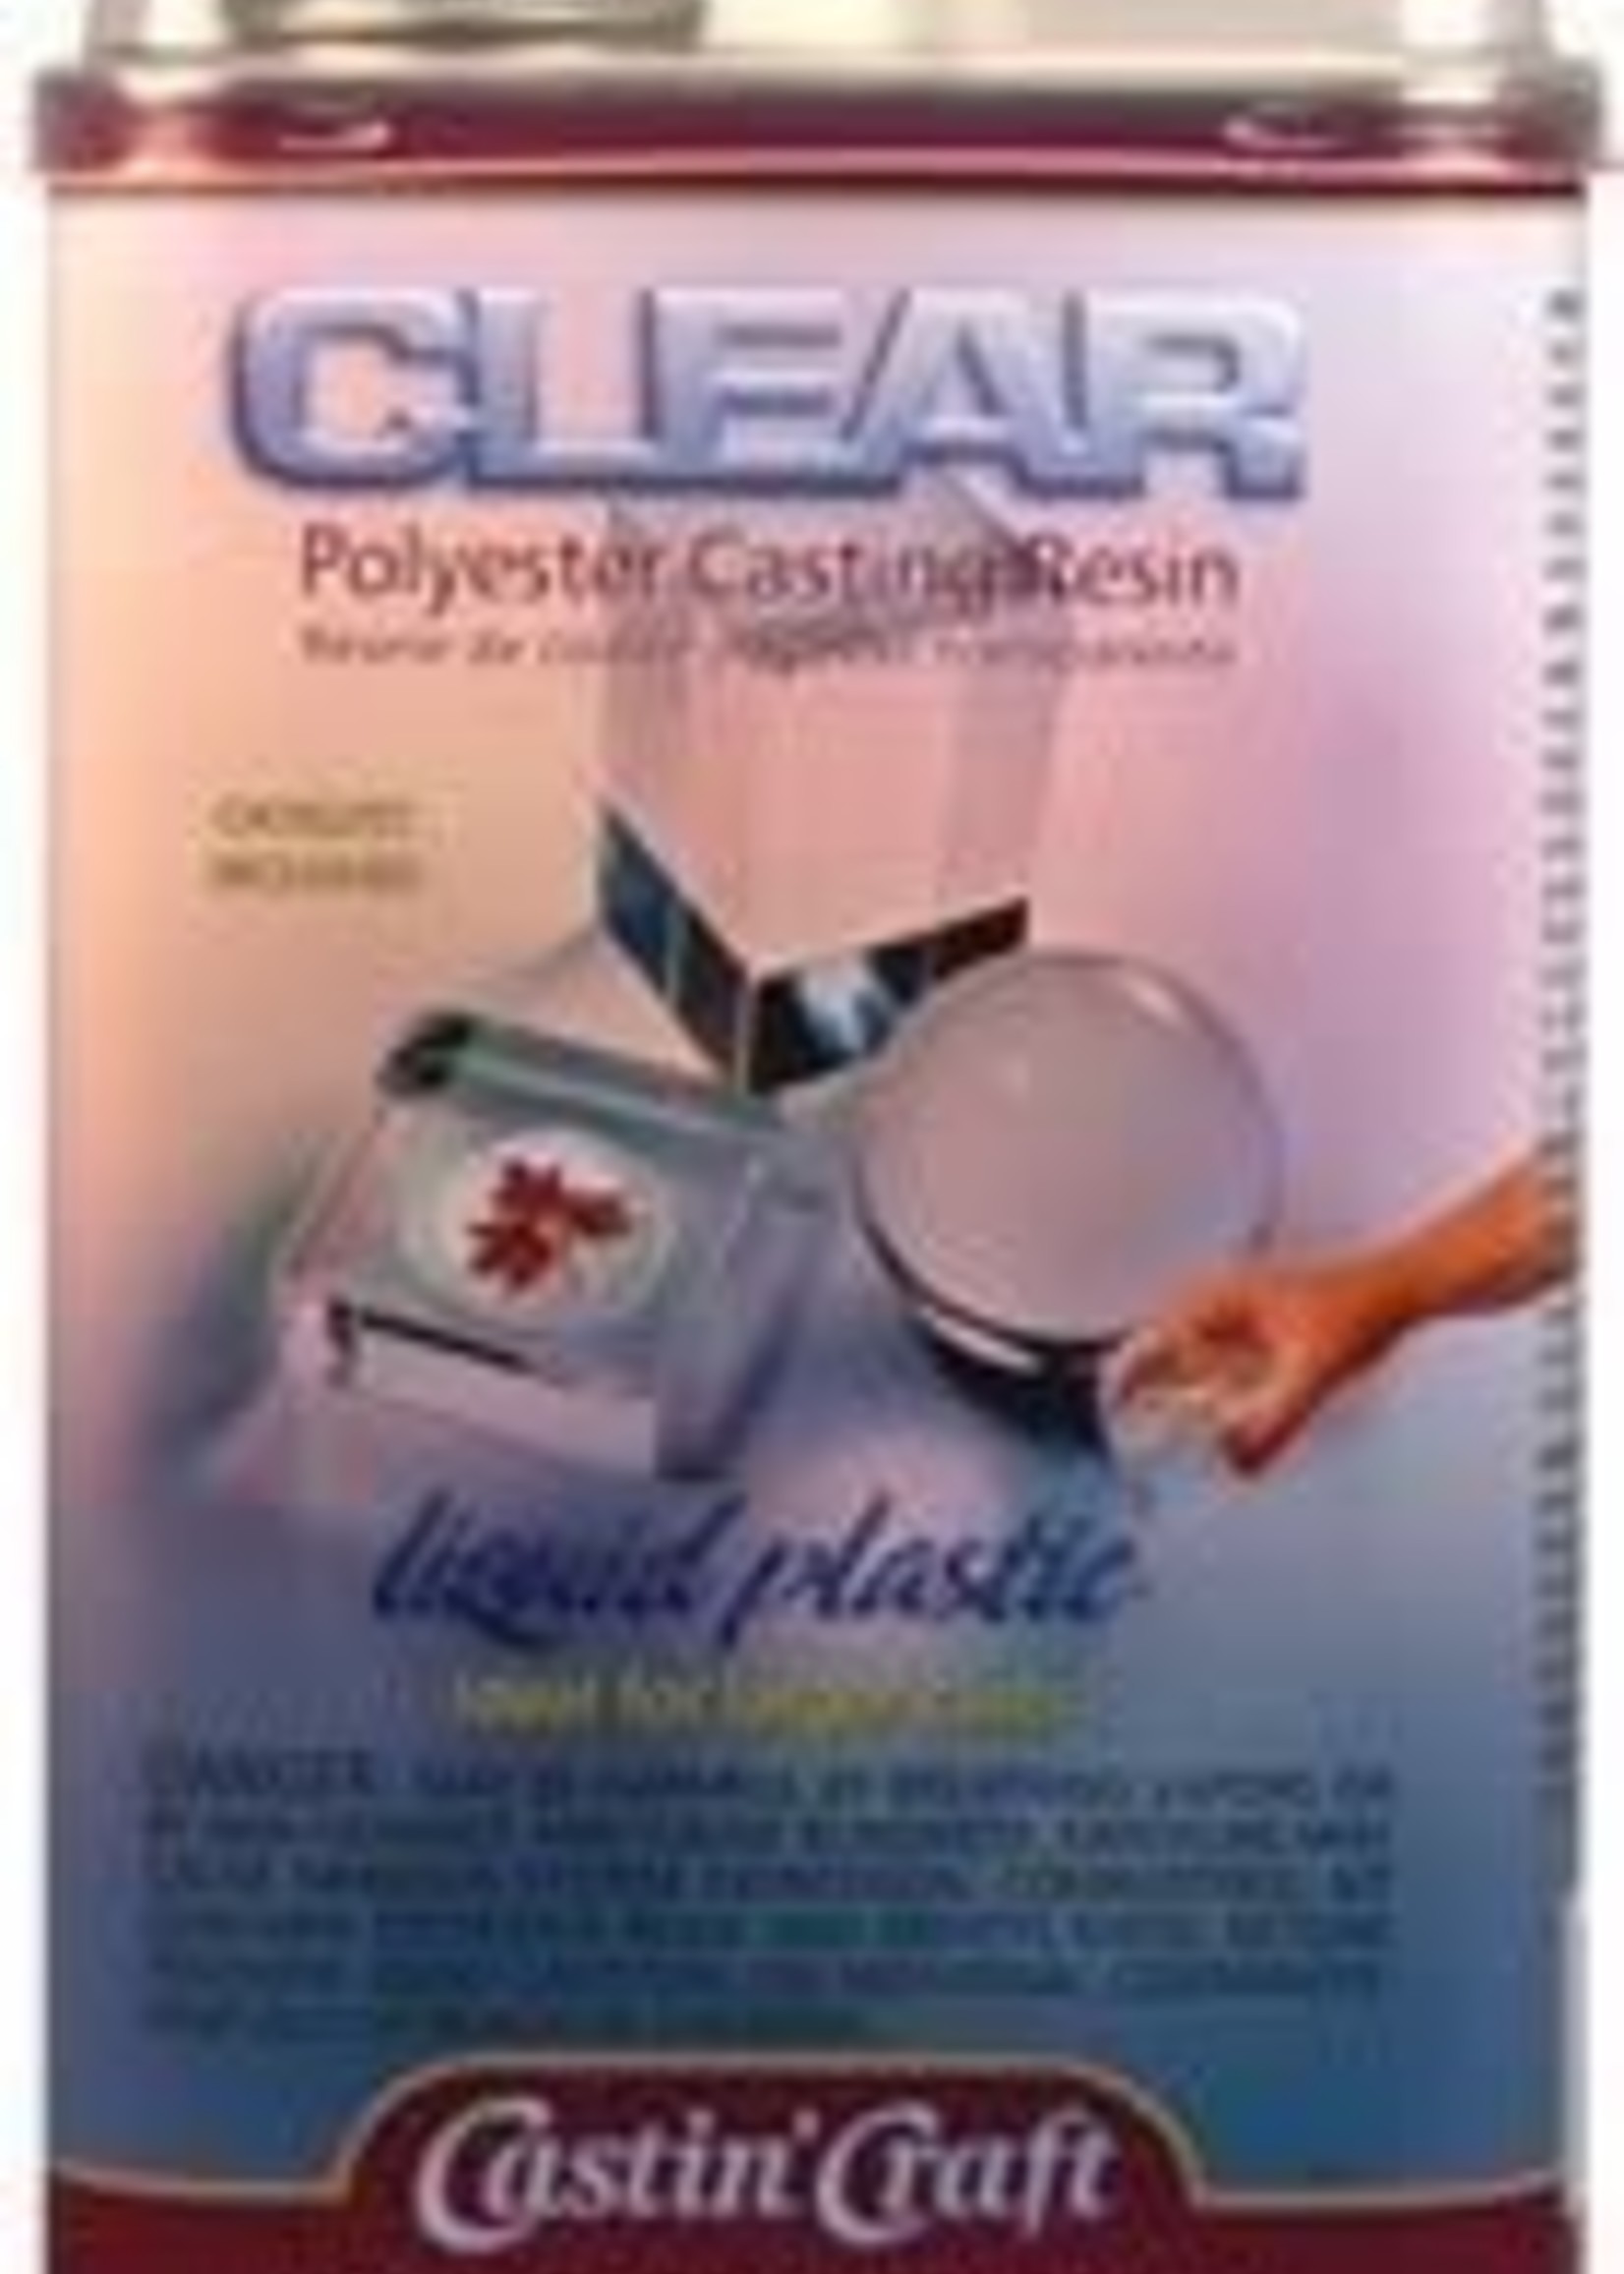 ENVIRONMENTAL TECHNOLOGY ENVIROTEX CASTING RESIN WITH CATALYST 32OZ